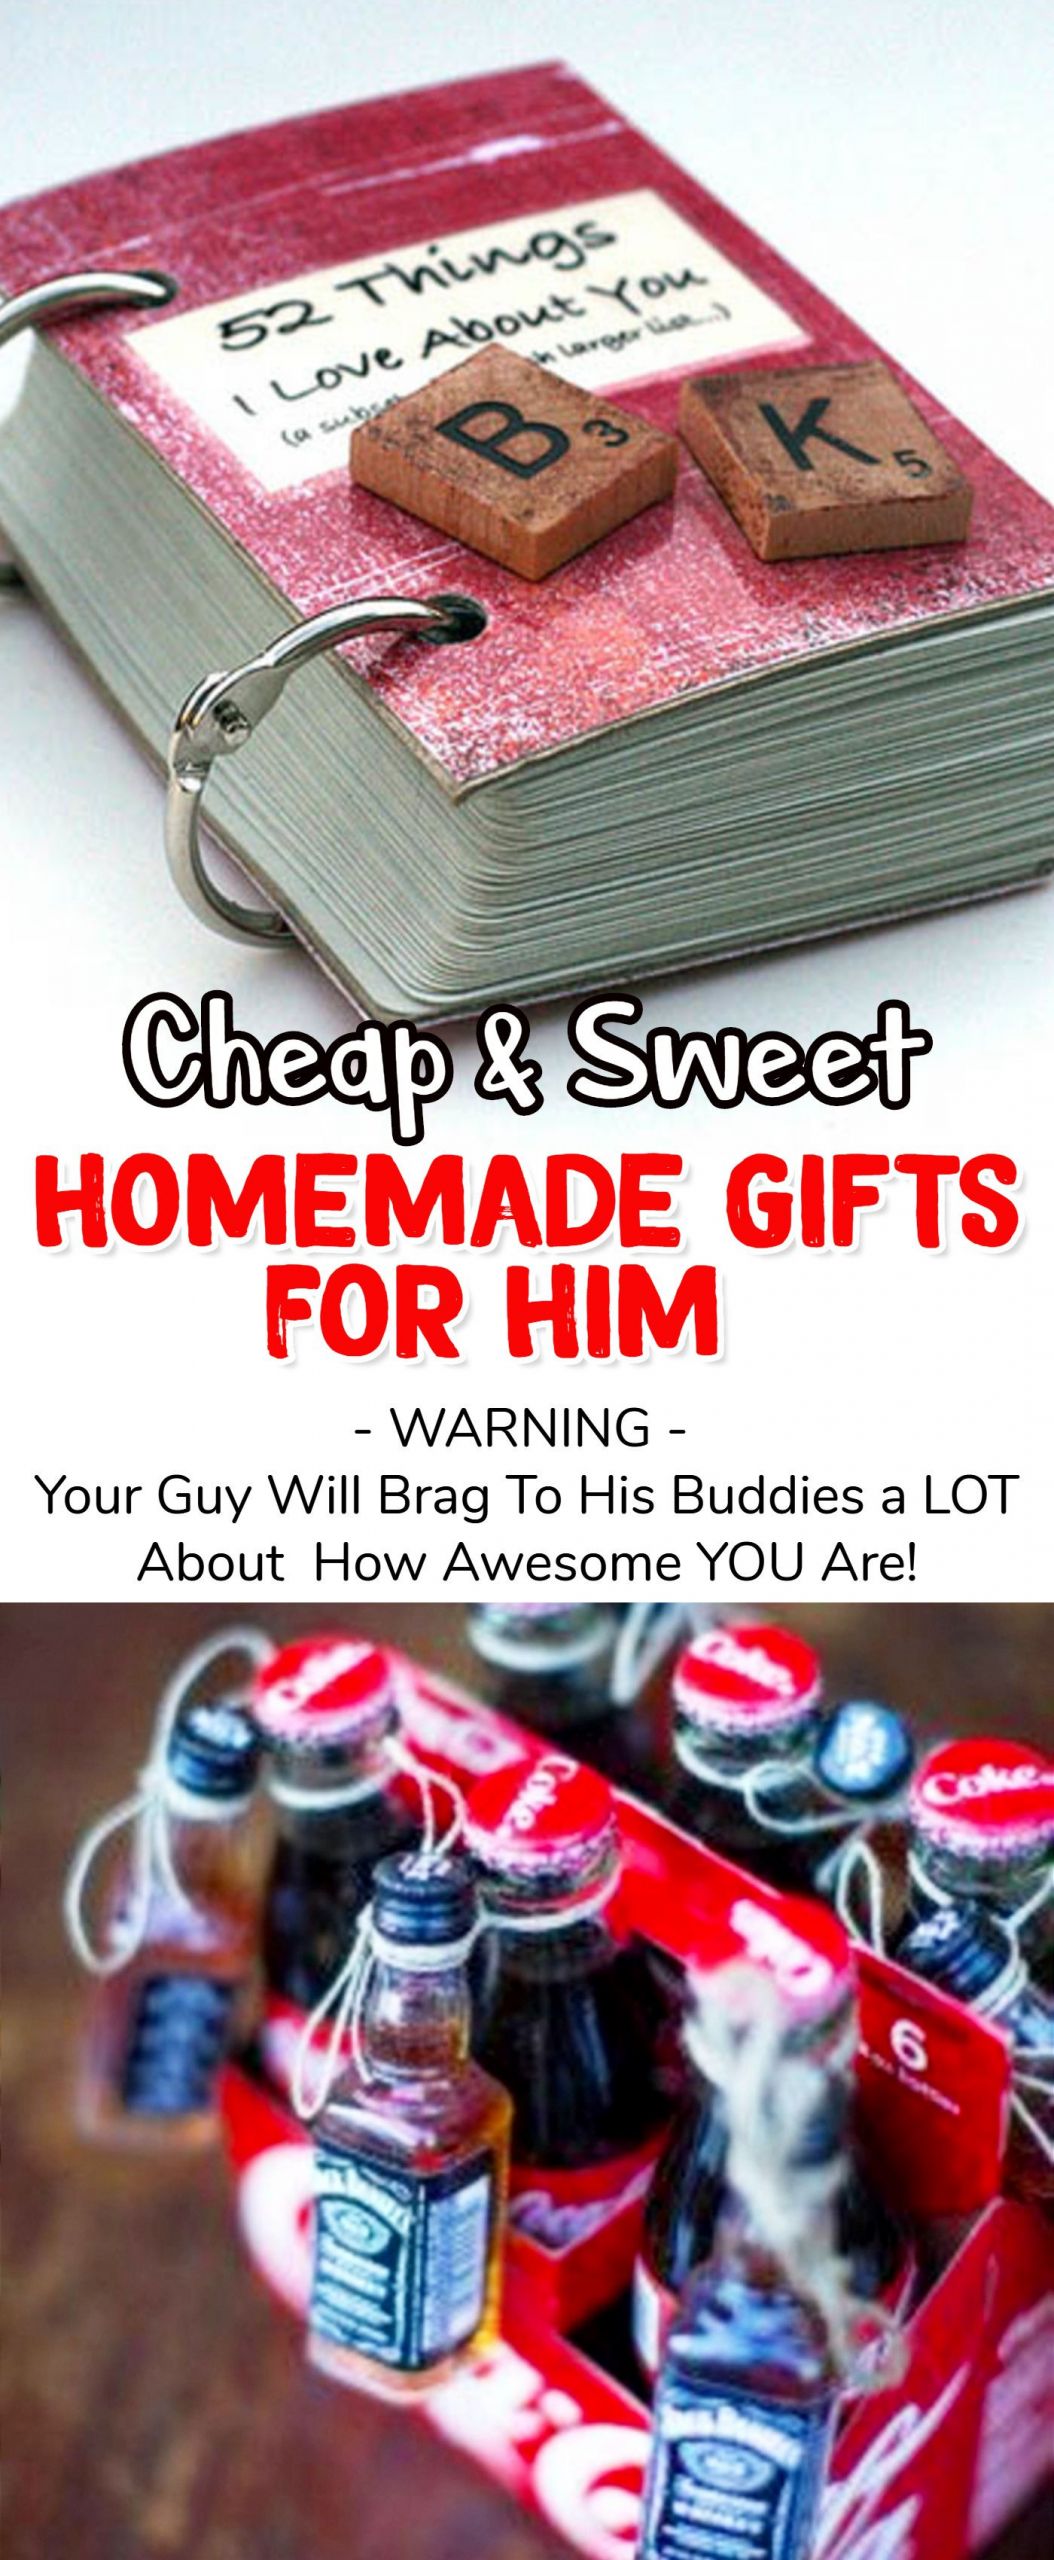 Handmade Gift Ideas For Boyfriend
 Homemade Gift Ideas For Him 26 Romantic DIY Gifts To